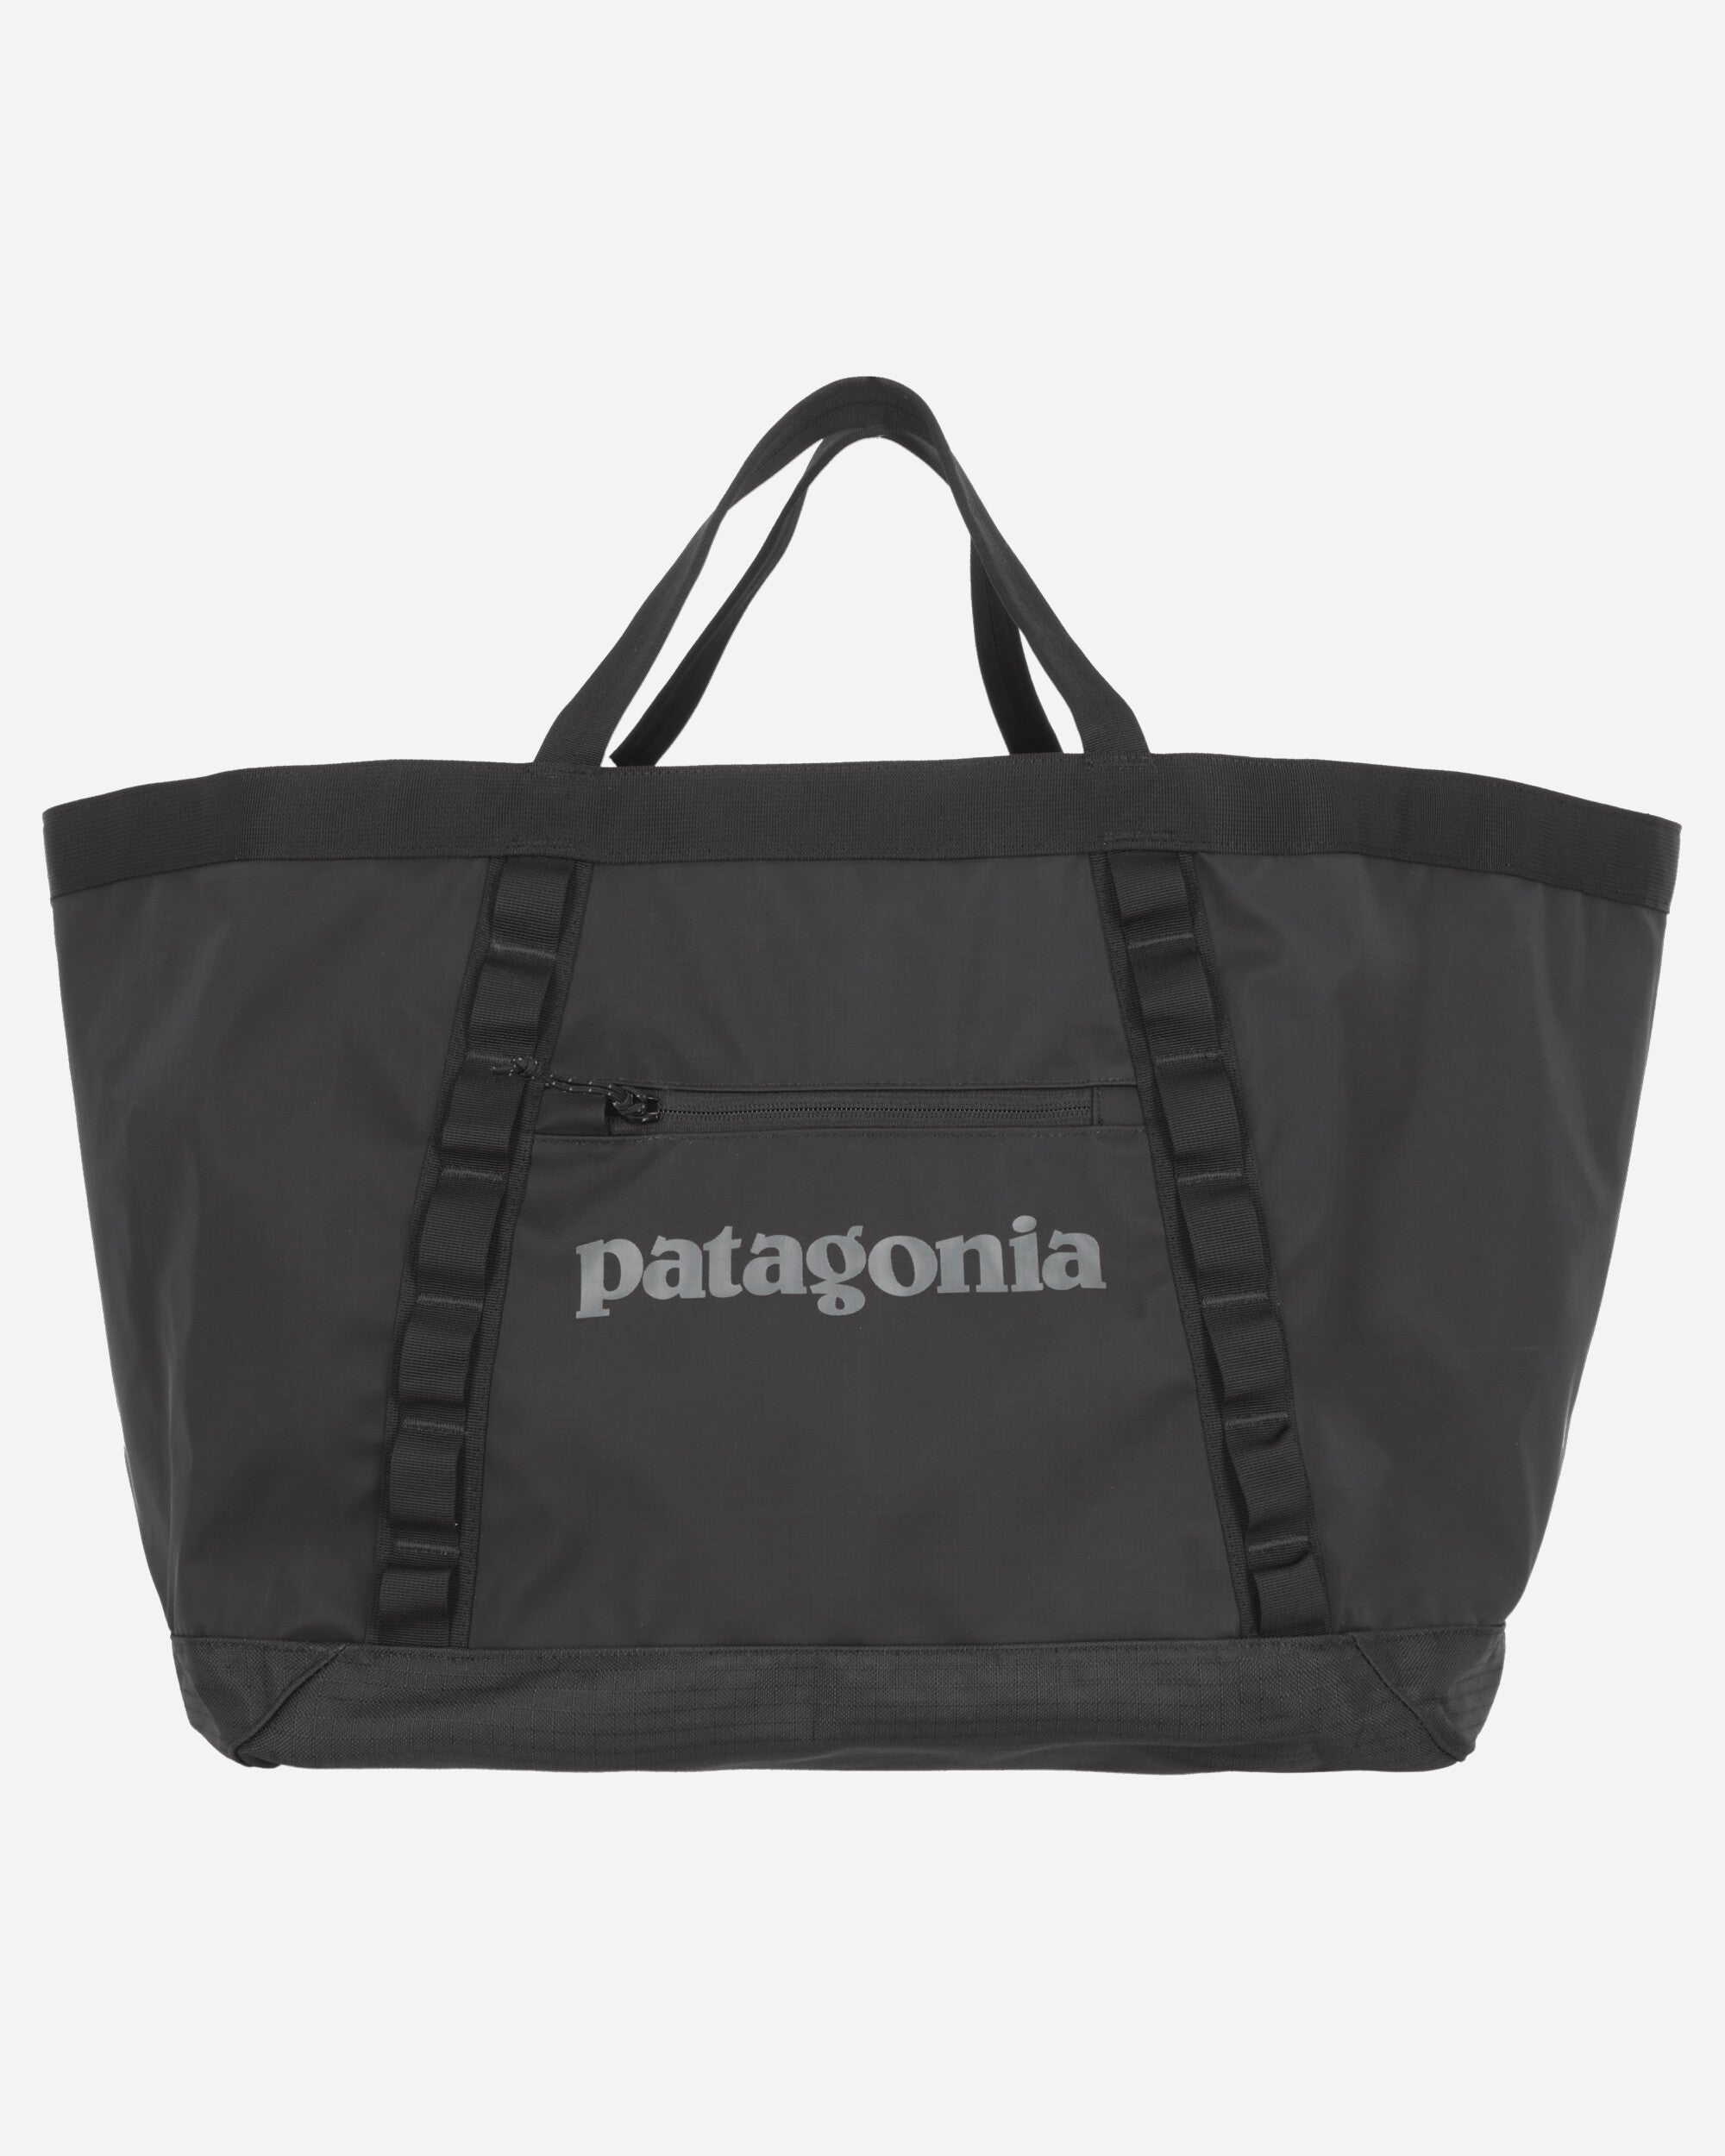 Patagonia Black Hole Gear Tote Black Bags and Backpacks Tote Bags 49276 BLK